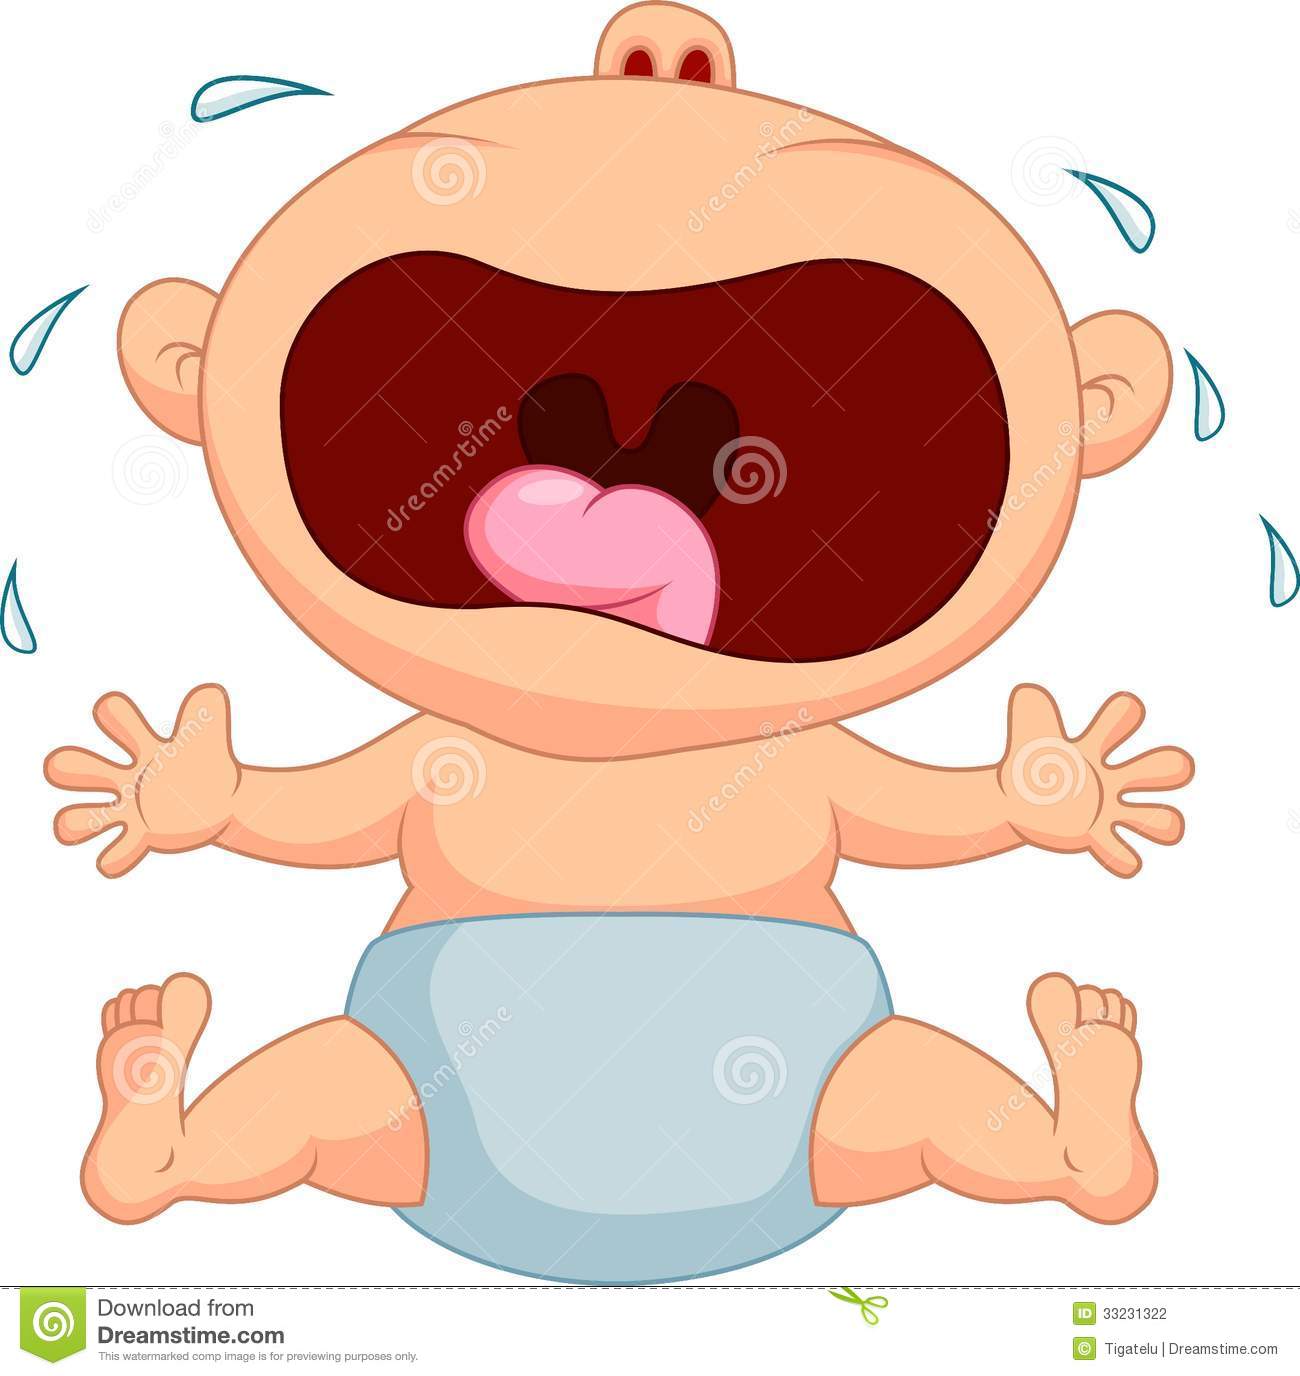 clipart of baby crying - photo #35